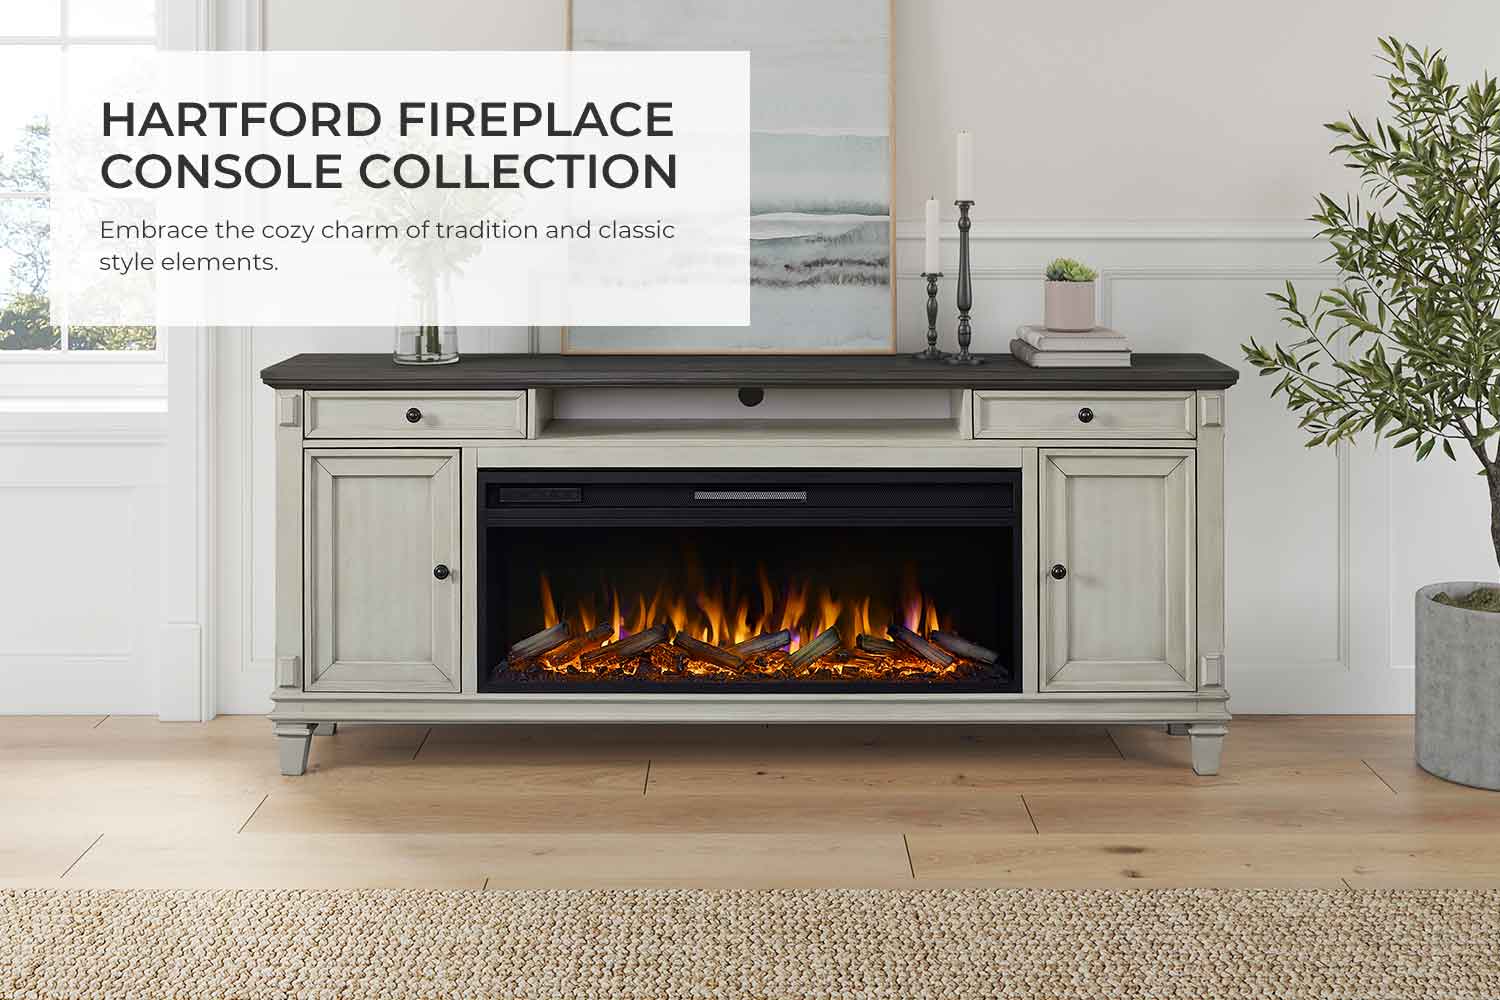 Hartford Fireplace Console Collection